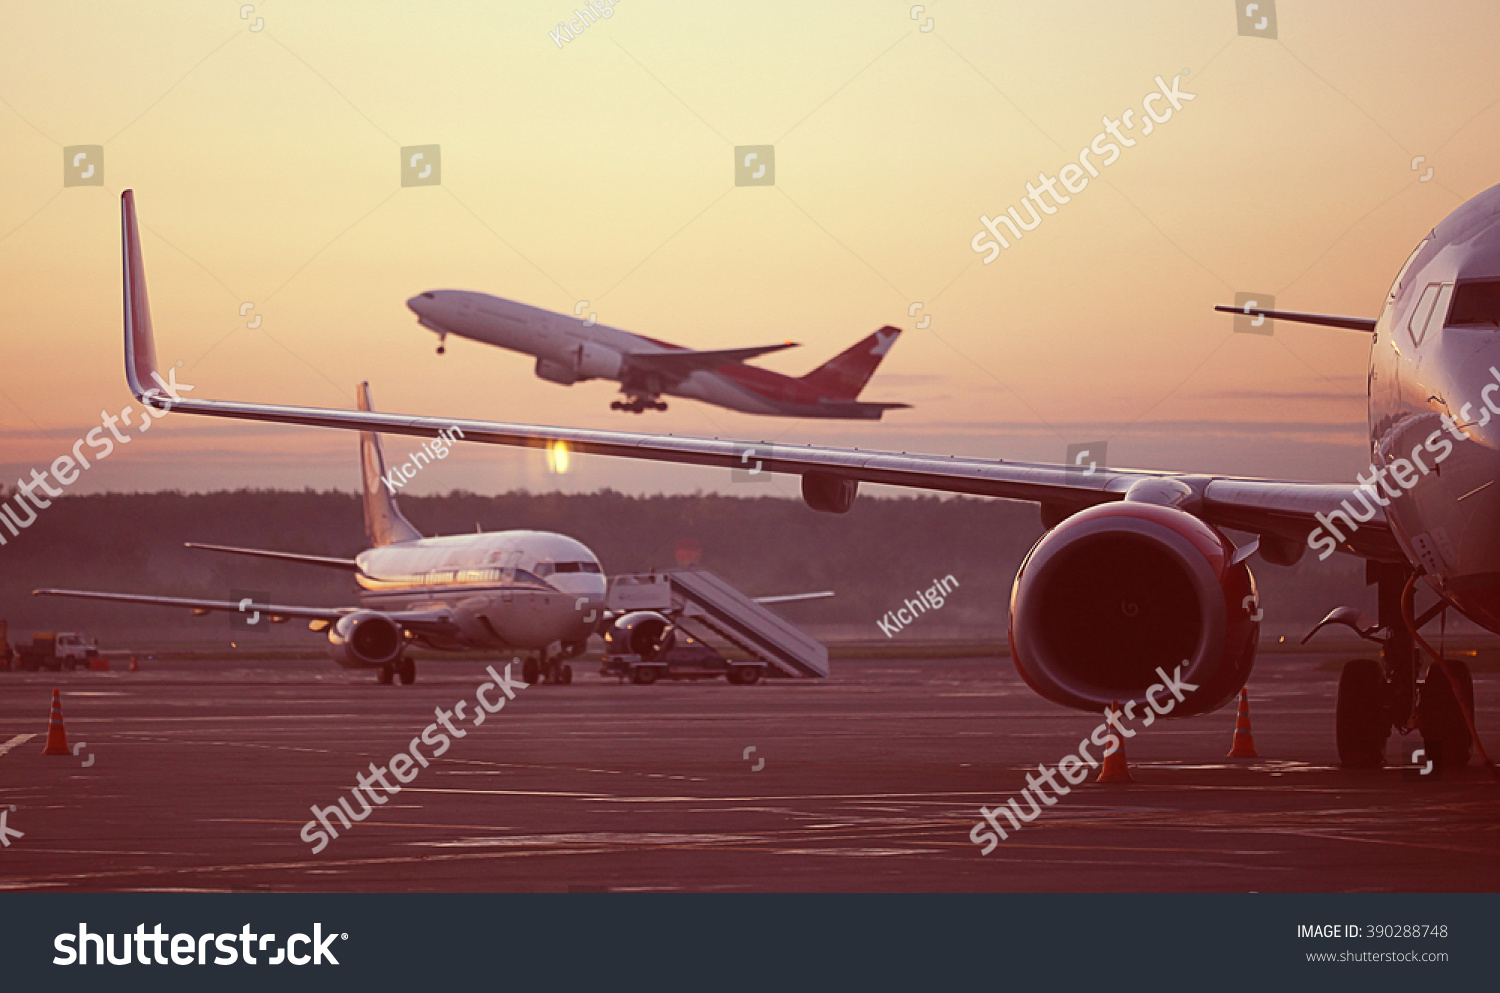 airport, the plane on takeoff, landscape #390288748